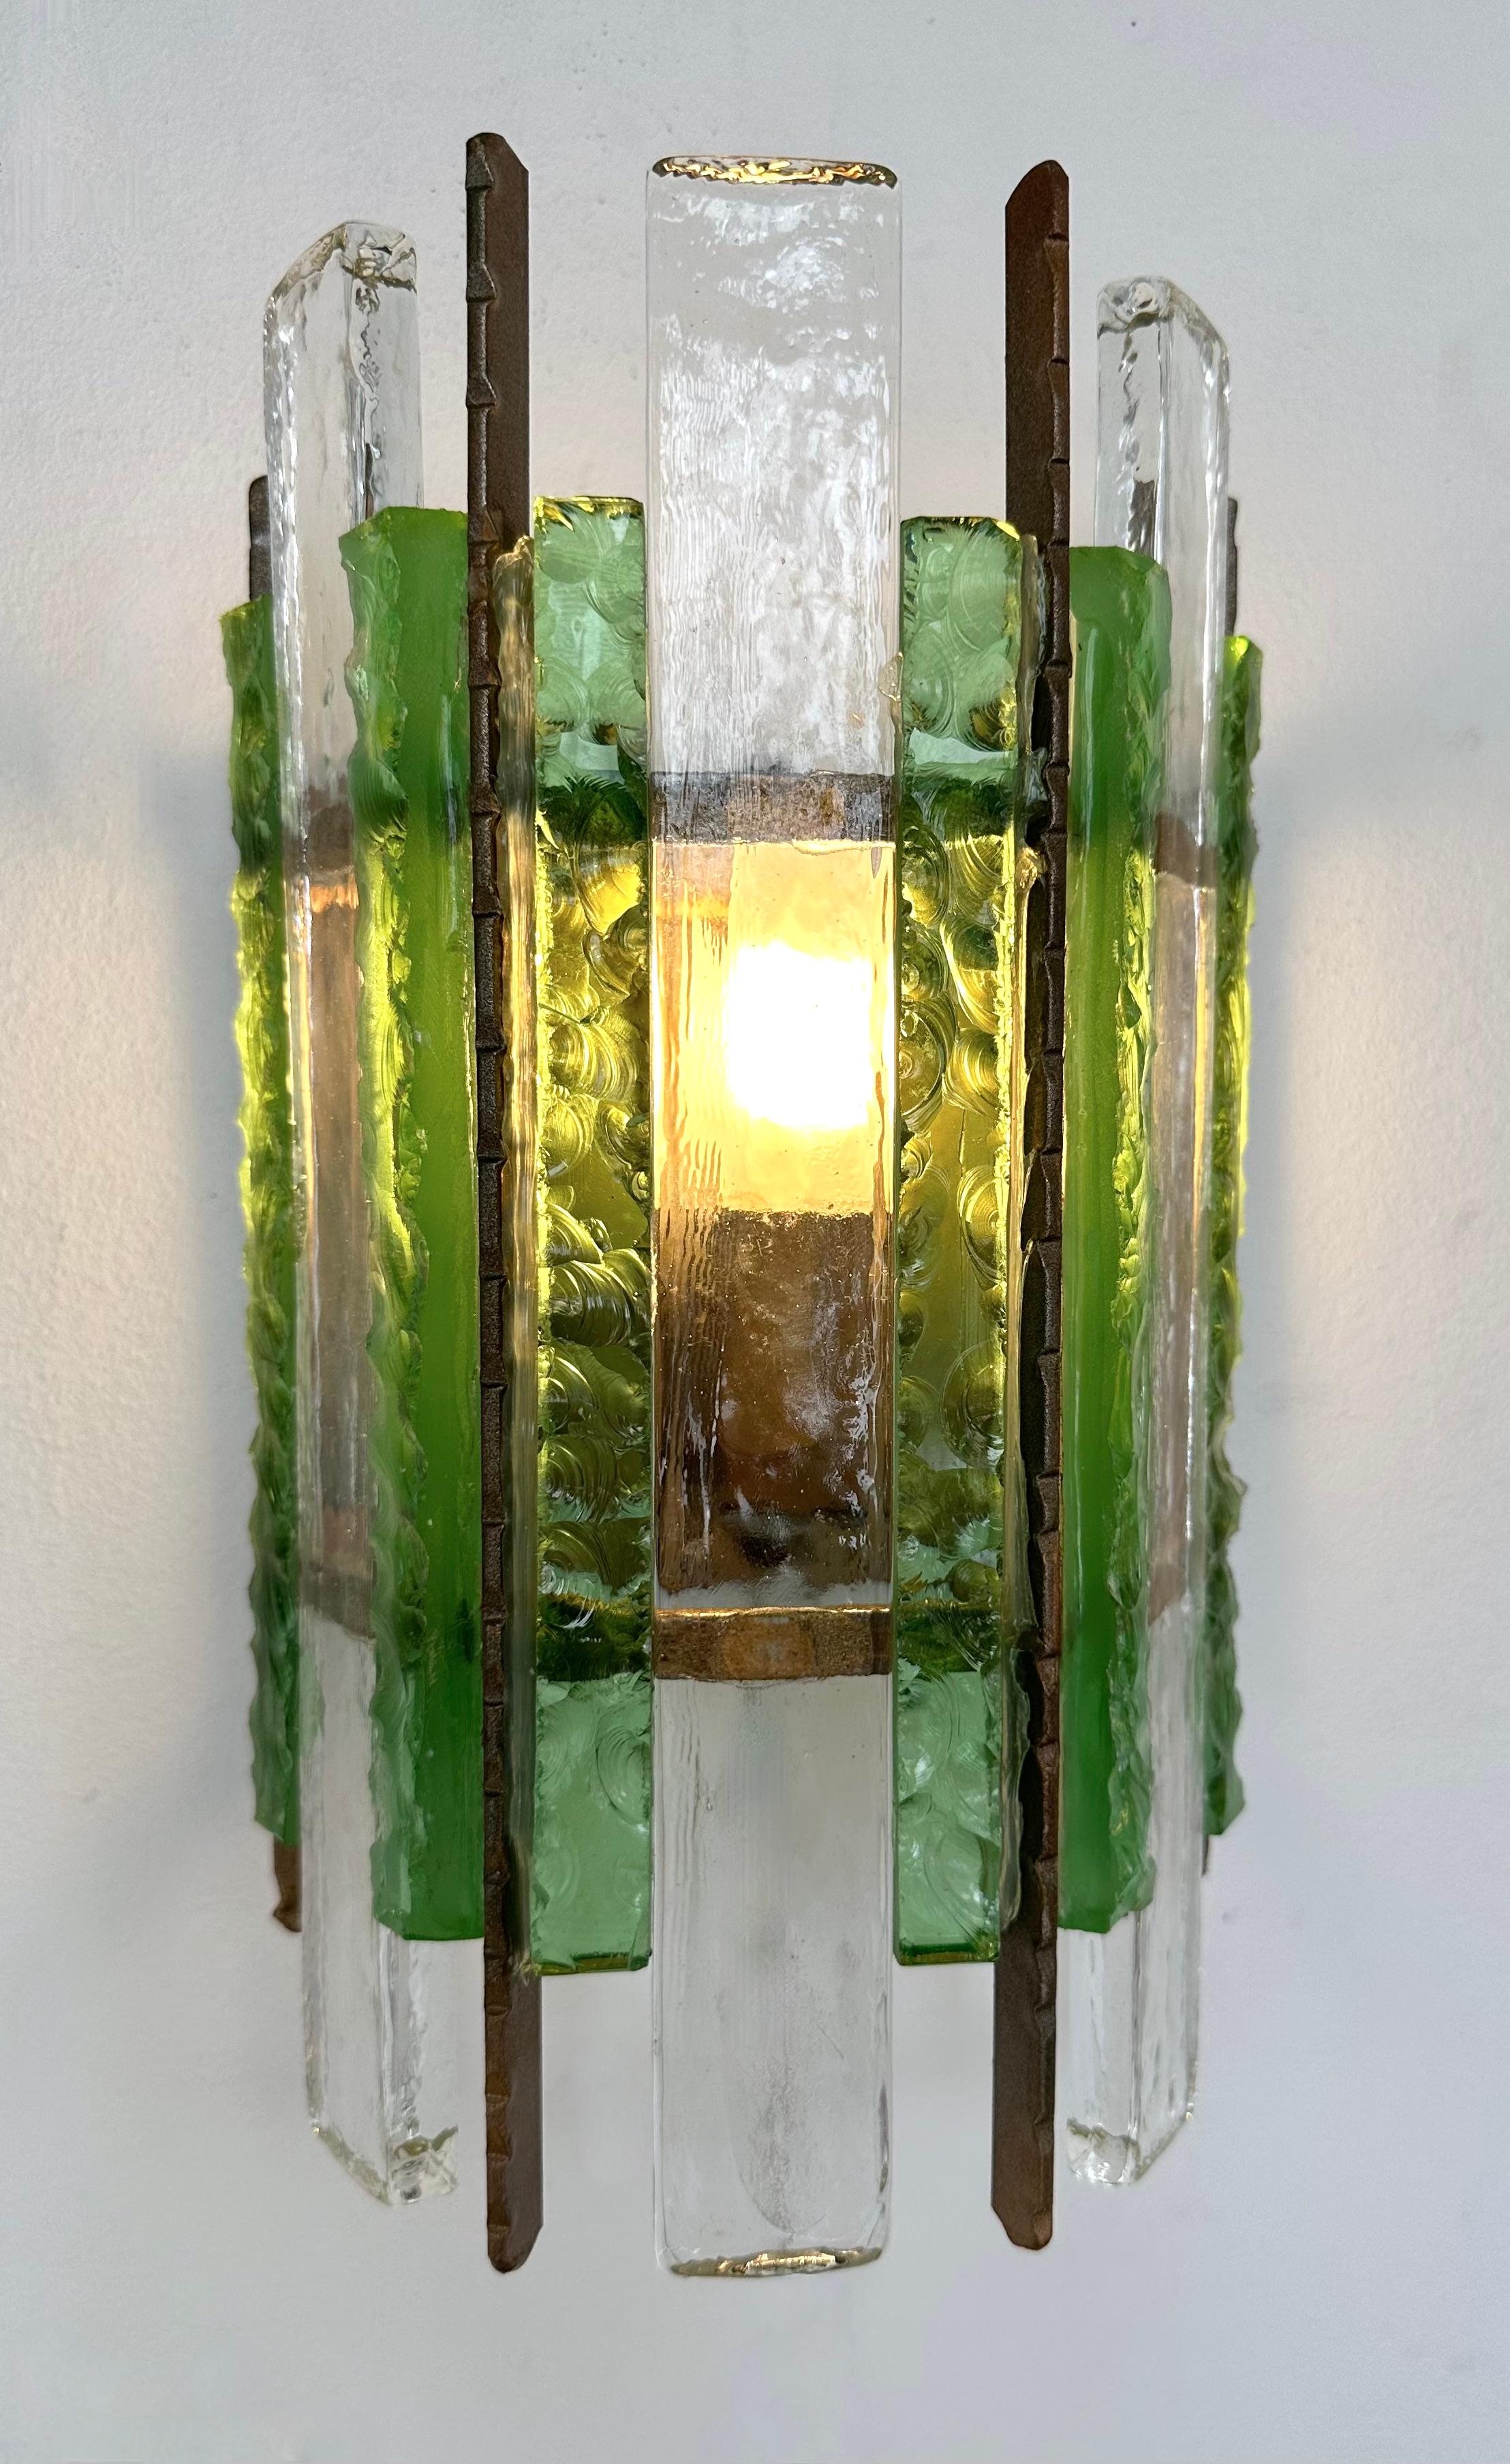 Pair of Hammered Glass Wrought Iron Sconces by Longobard, Italy, 1970s For Sale 7